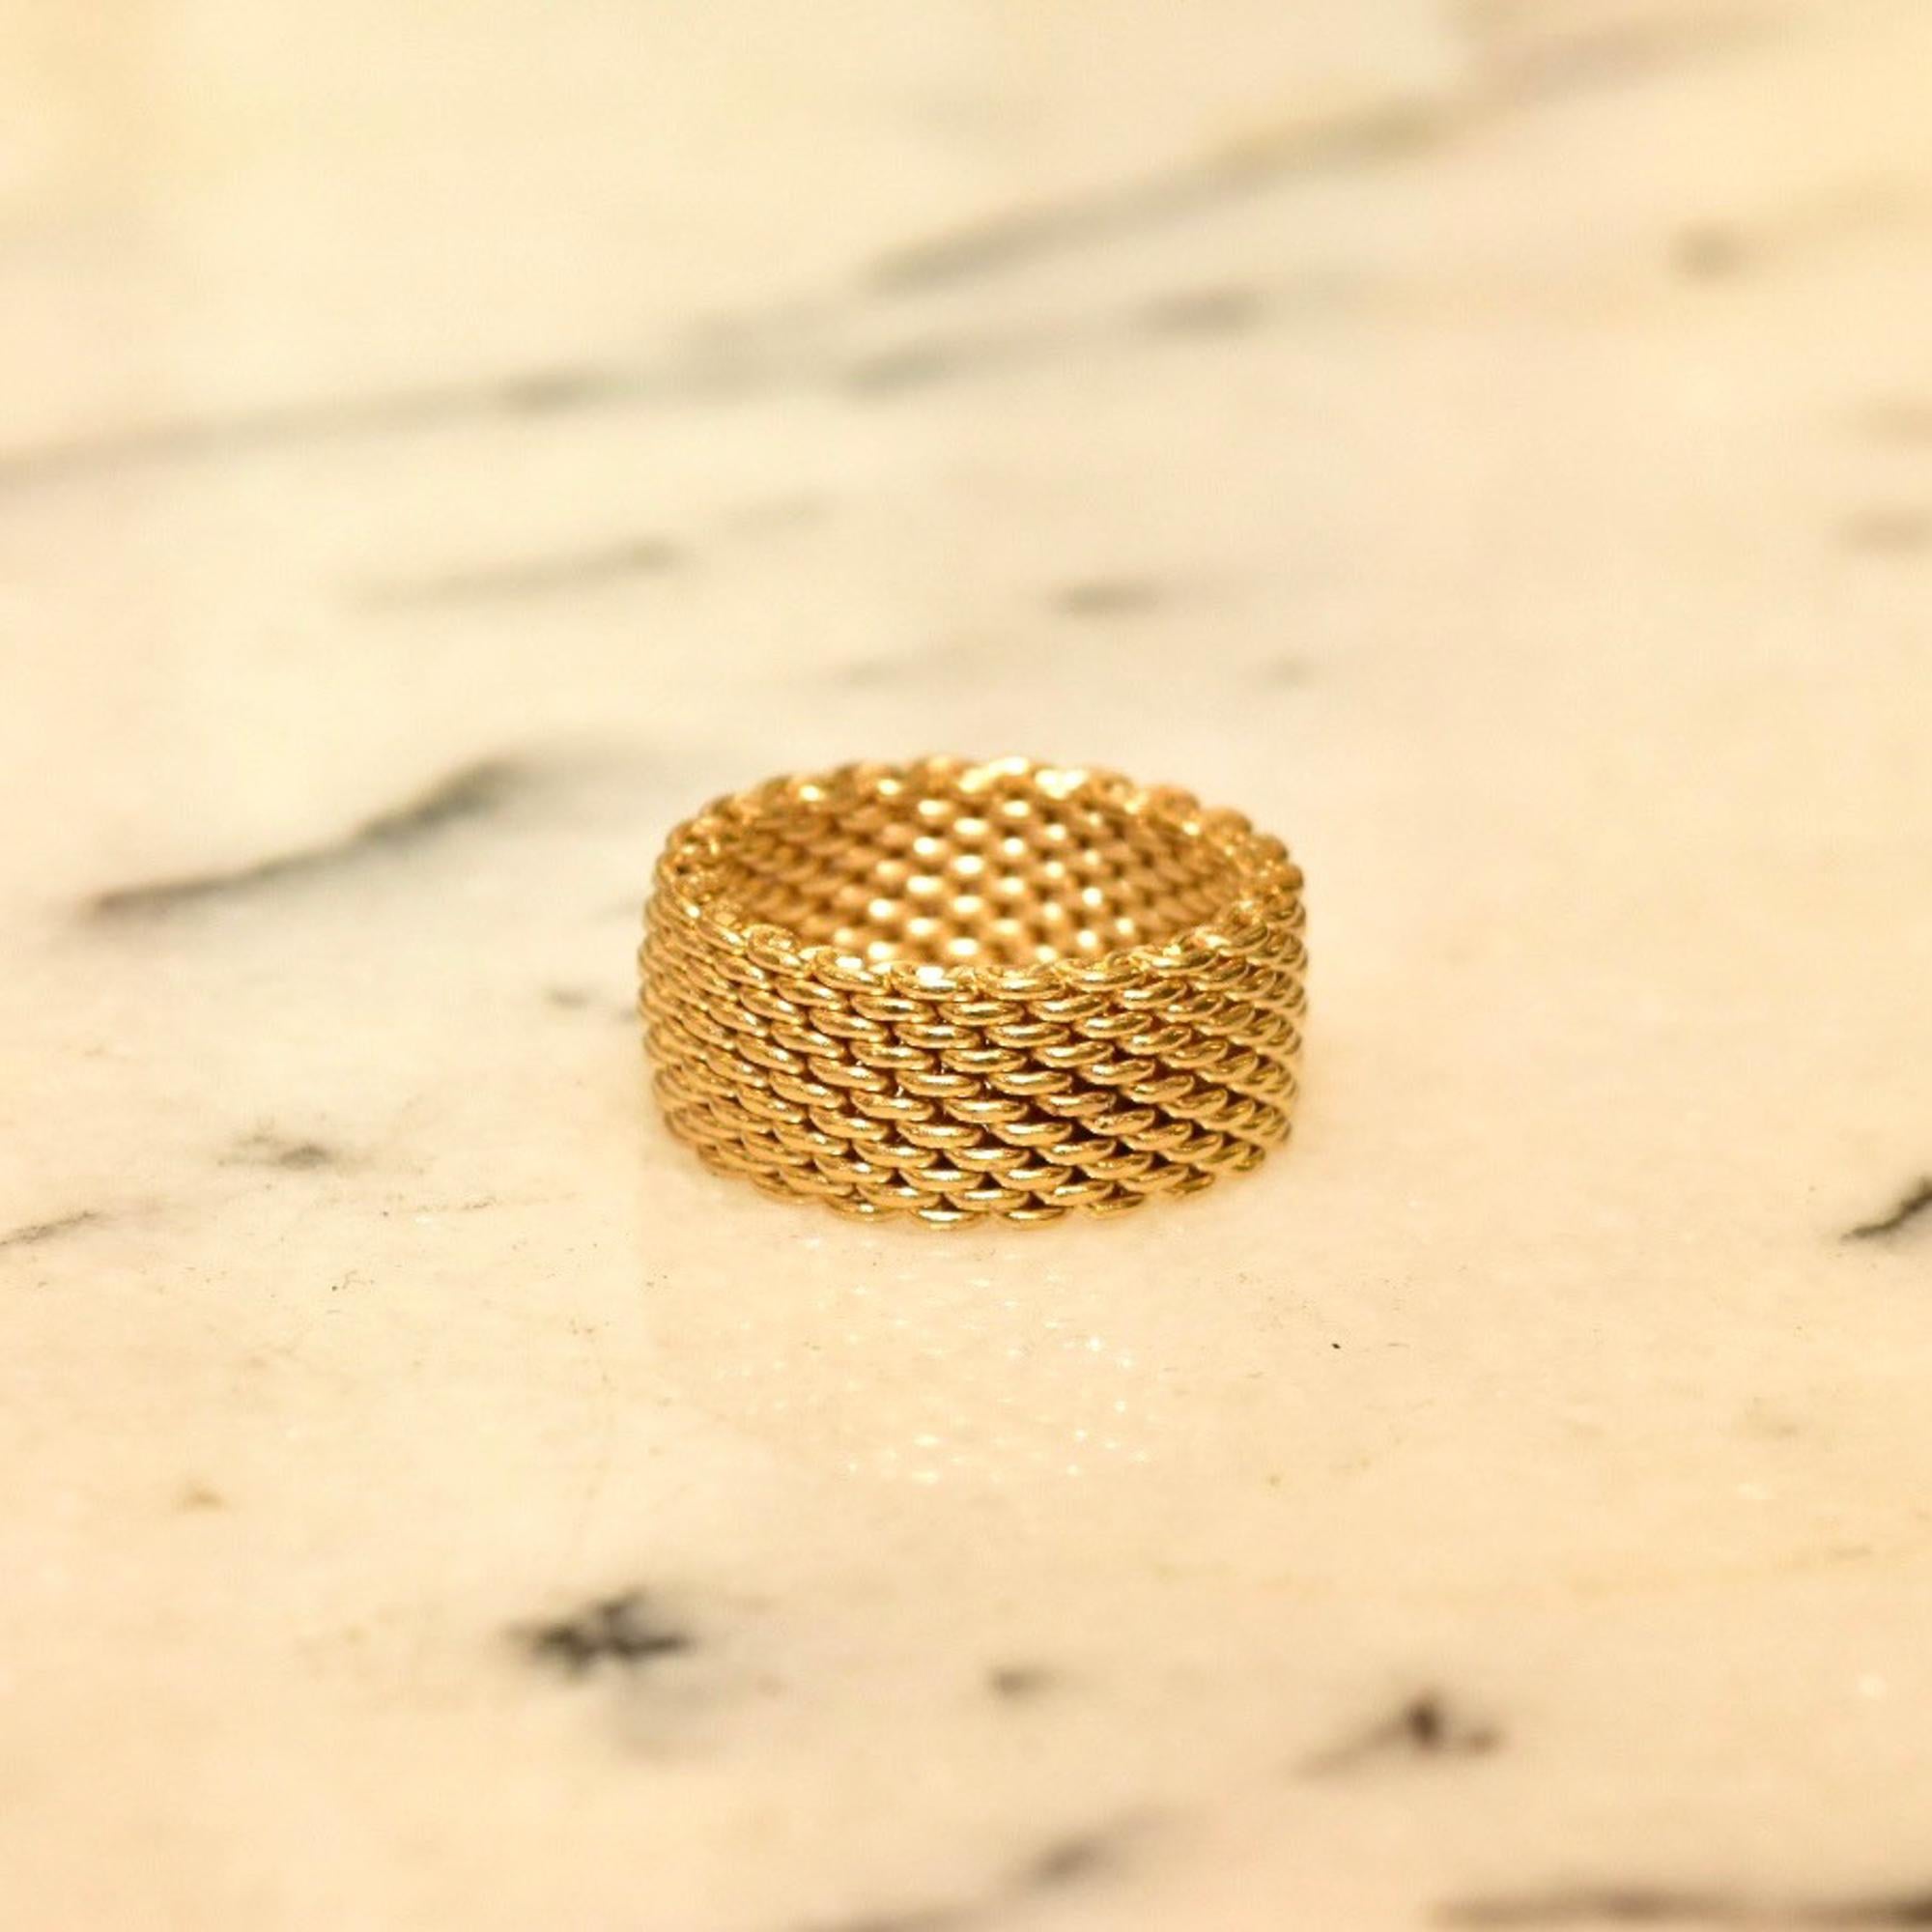 A timeless Tiffany & Co. 18k yellow gold Somerset ring. Features a 10 mm flexible mesh  band comprised of solid gold links just over 2 mm thick. The ring has substantial weight and fits comfortably on a size 8 3/4 finger.

The ring is hallmarked